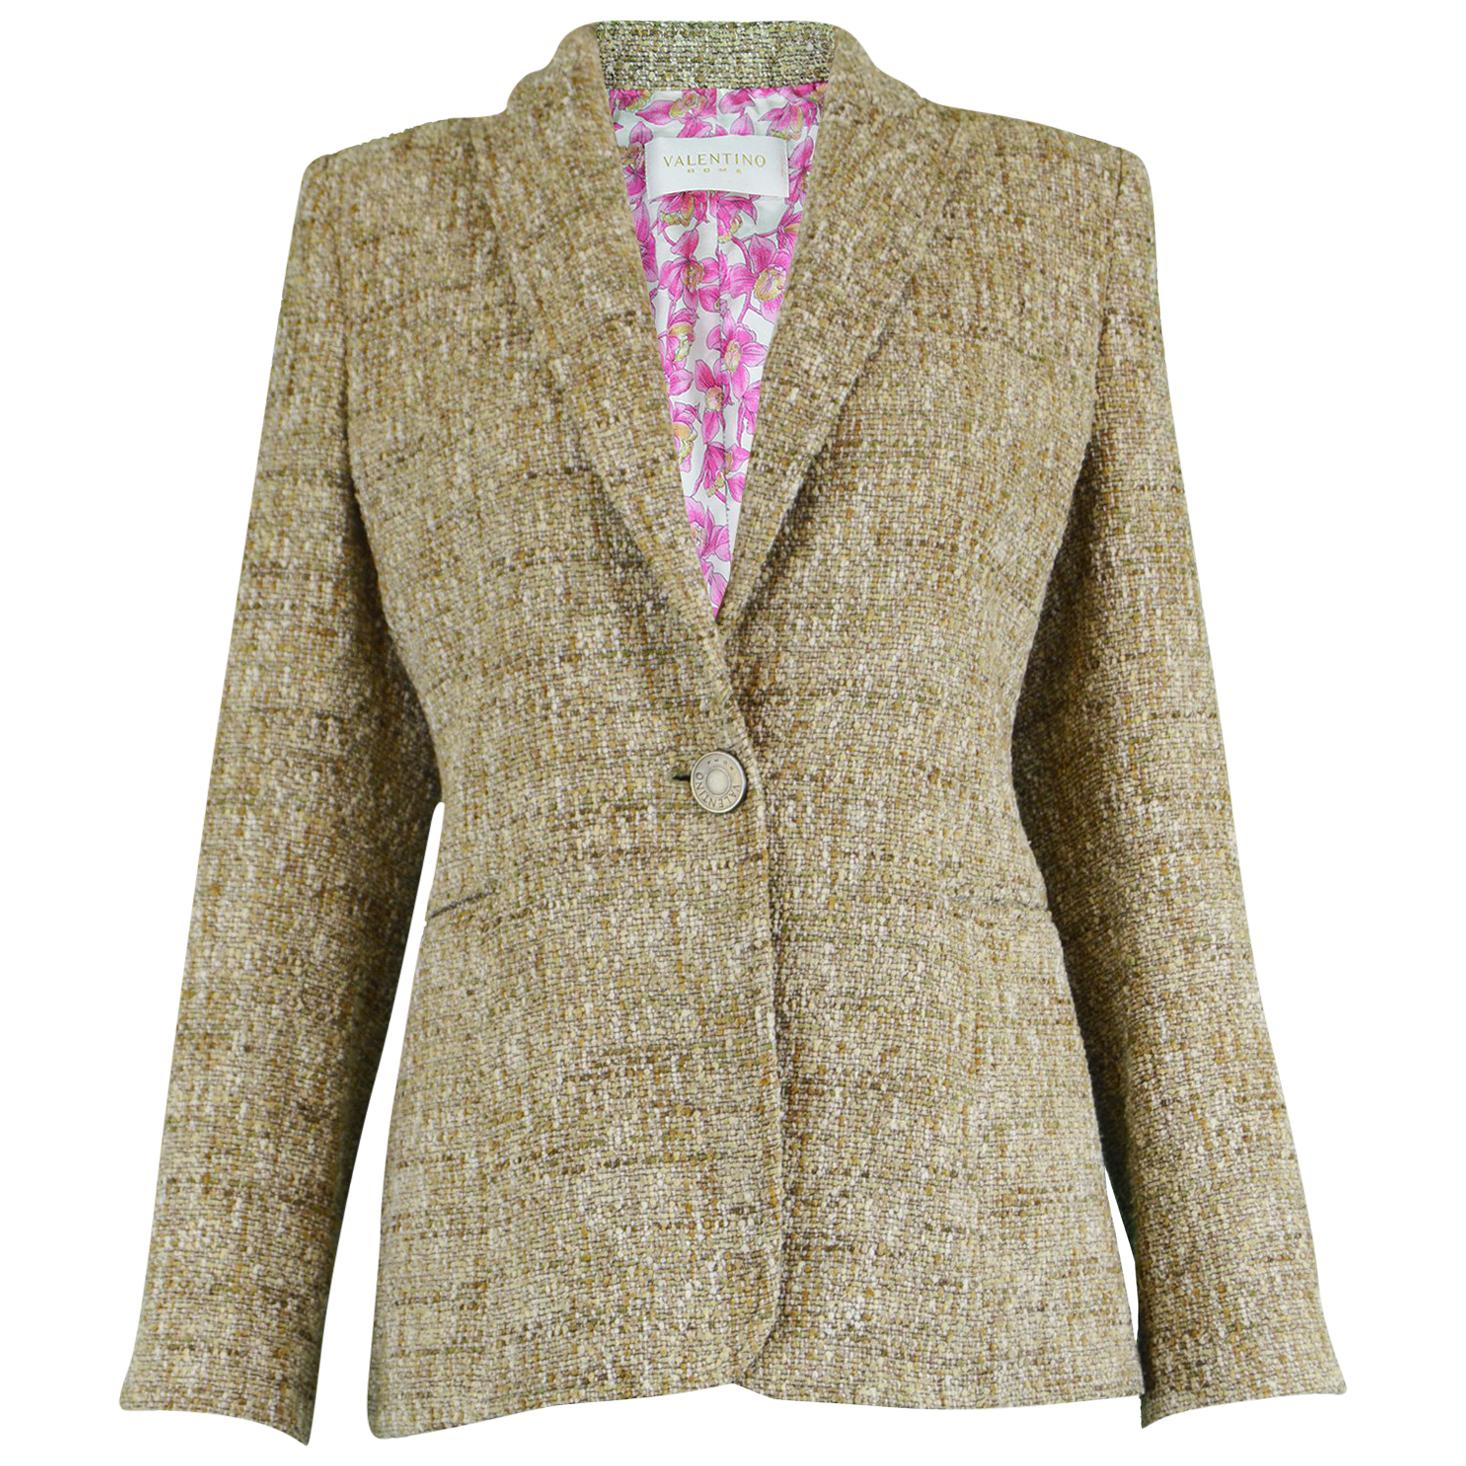 Valentino Roma Oatmeal Wool & Silk Bouclé Tweed Jacket with Floral Lining